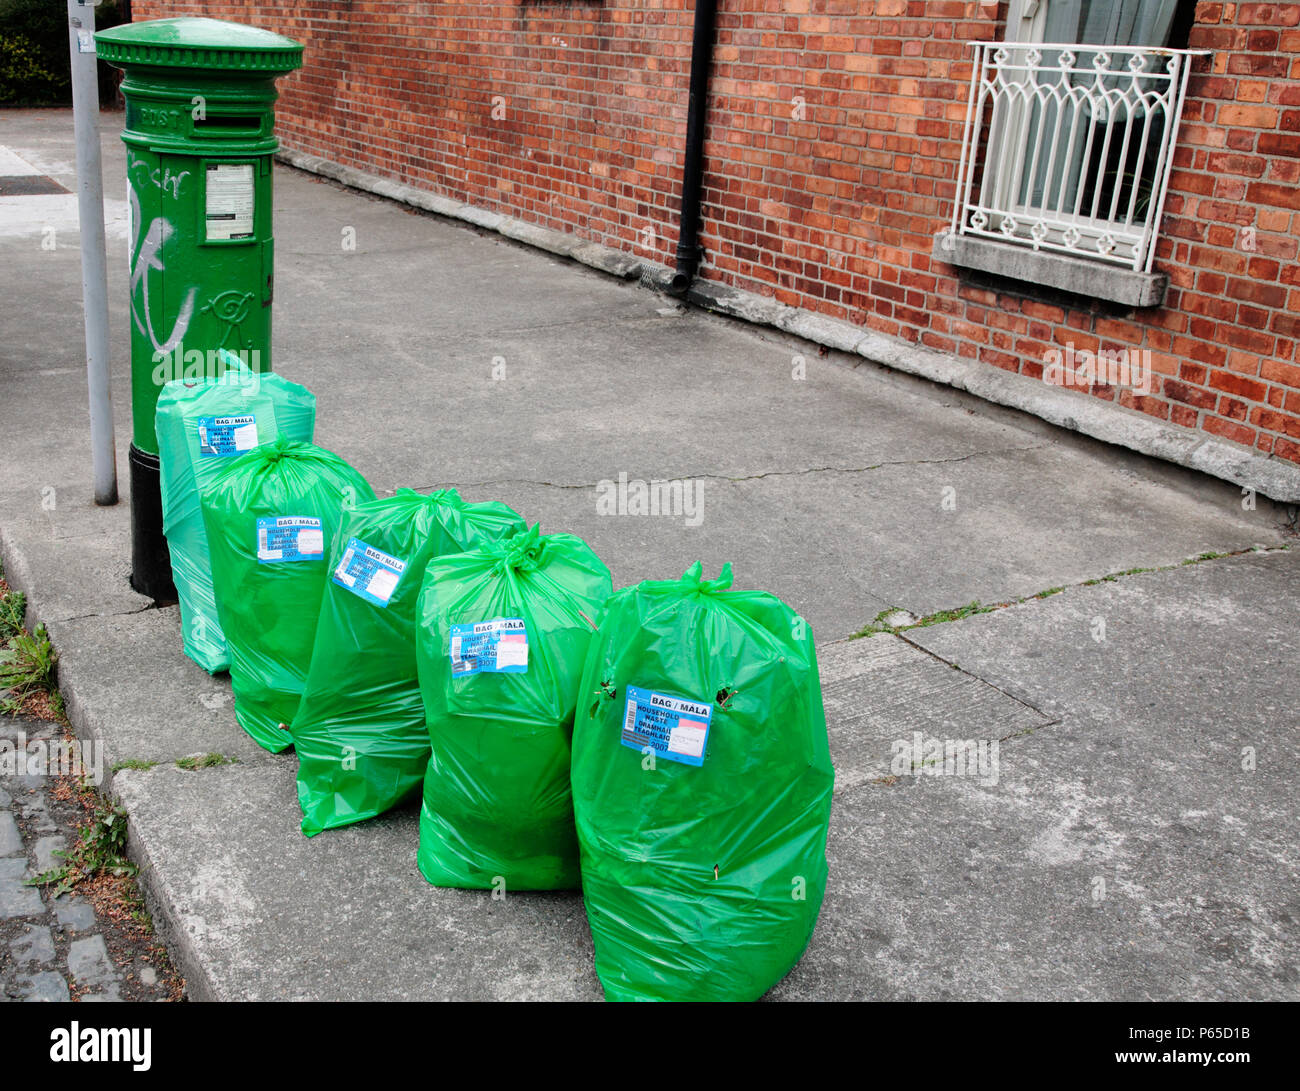 Refuse sacks awaiting collection, Dublin, Ireland. Refuse collection is paid for with tags which you buy in advance and attach to the bin or refuse sa Stock Photo